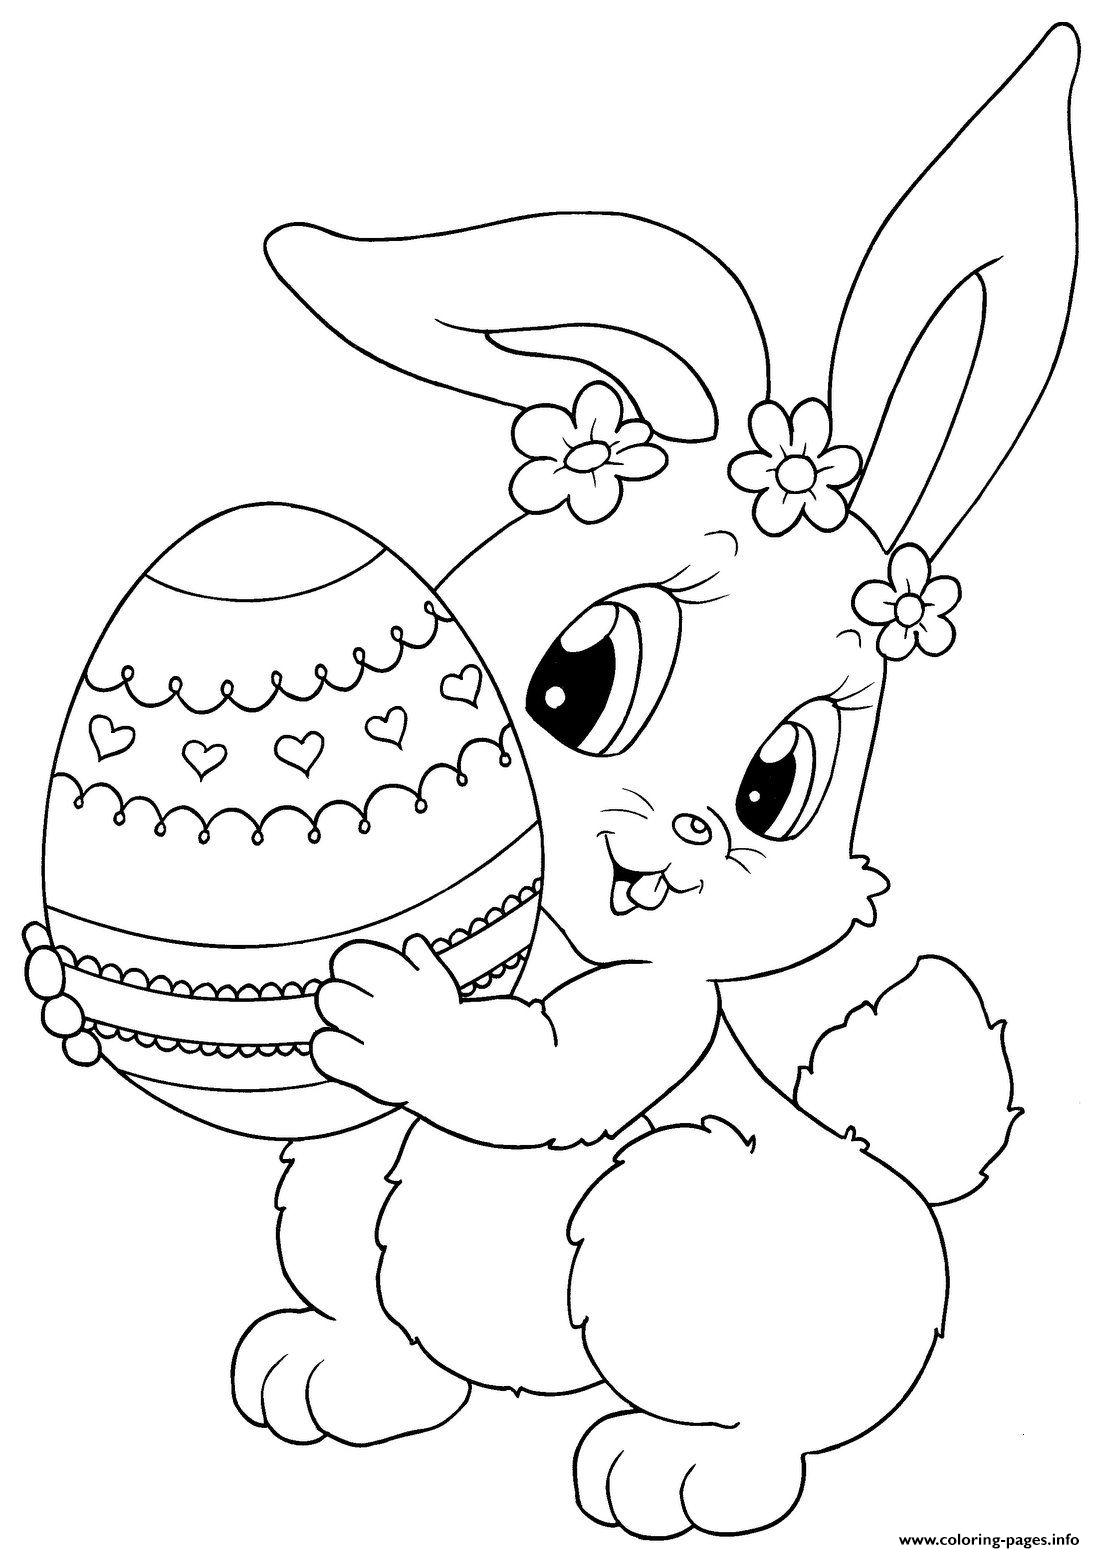 Cute Easter Bunny With Egg coloring